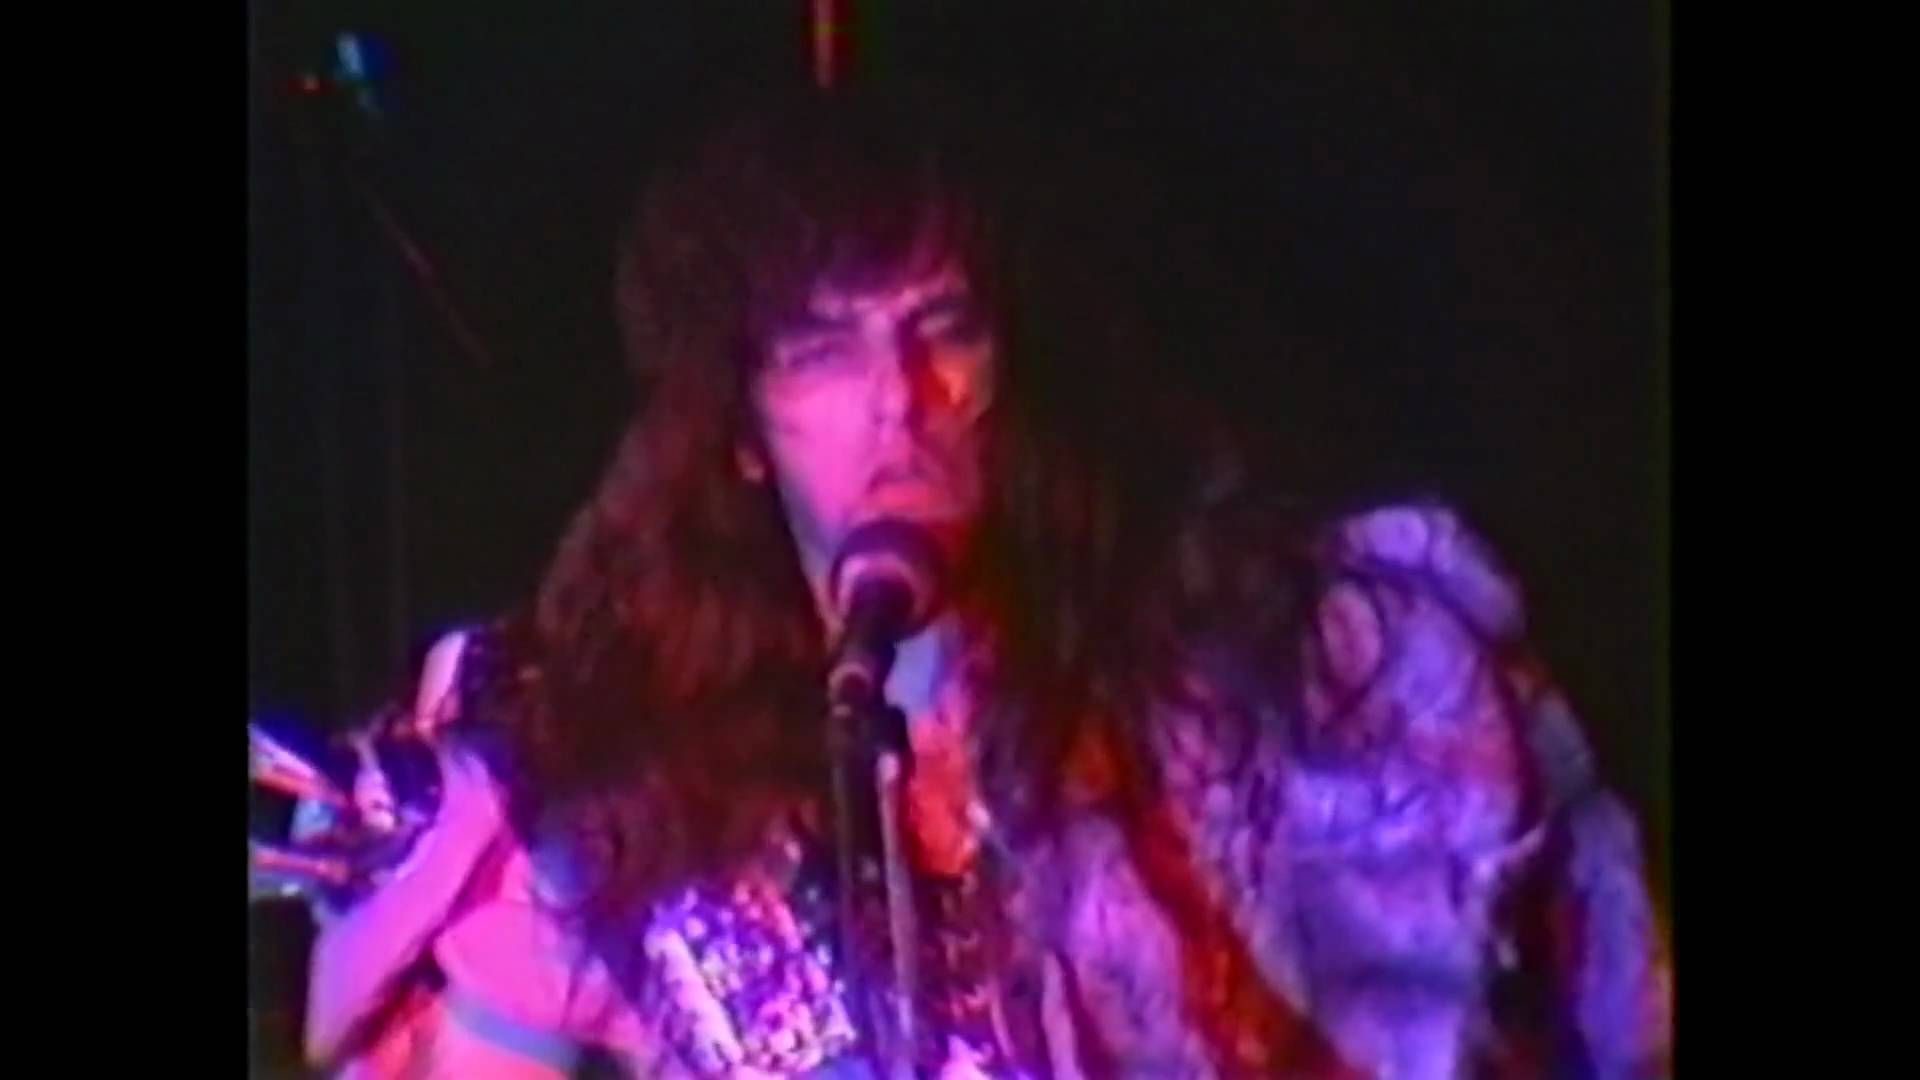 1920x1080 CARNIVORE "DELIVER US TO EVIL" LIVE @ L'AMOUR BROOKLYN, NY 9.15.84